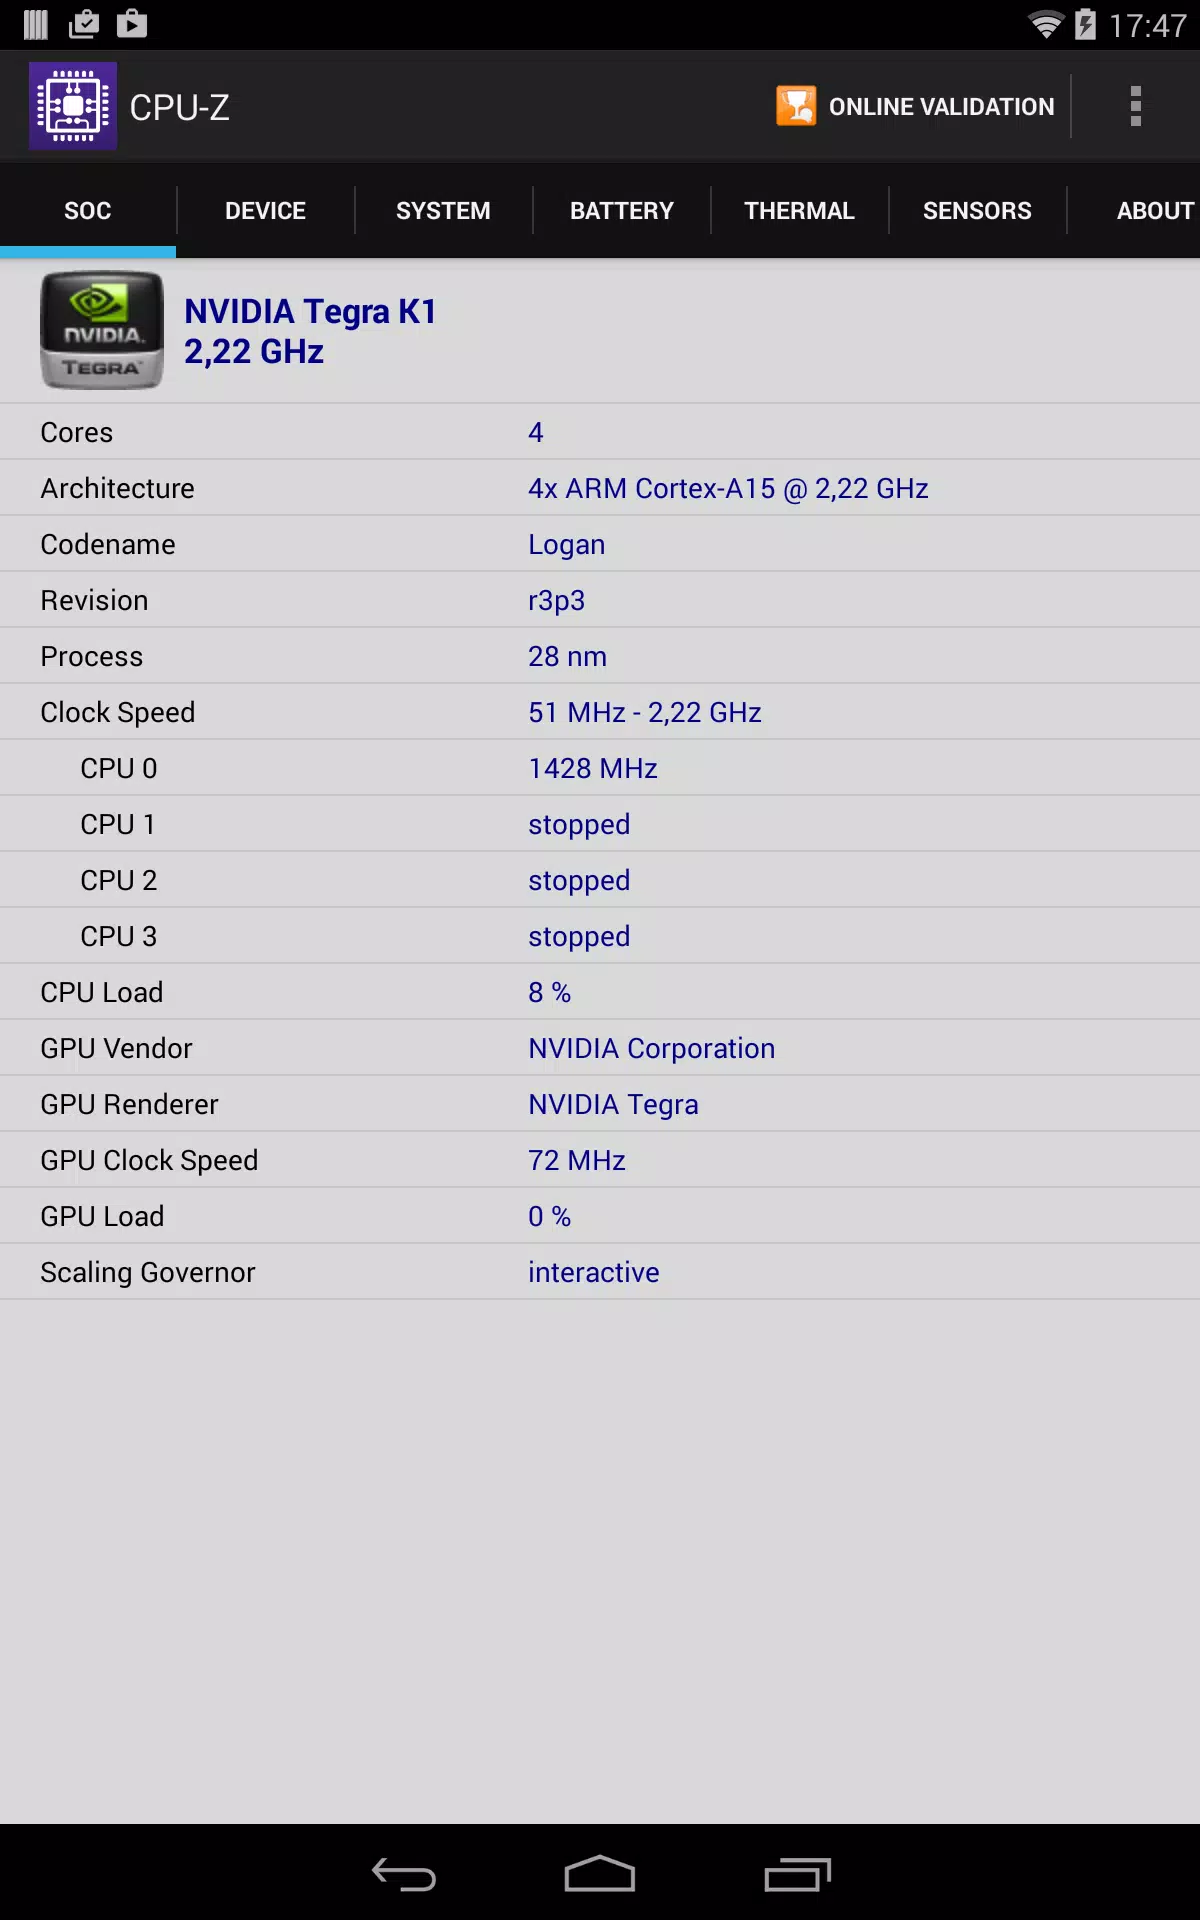 CPU-Z for Android - APK Download